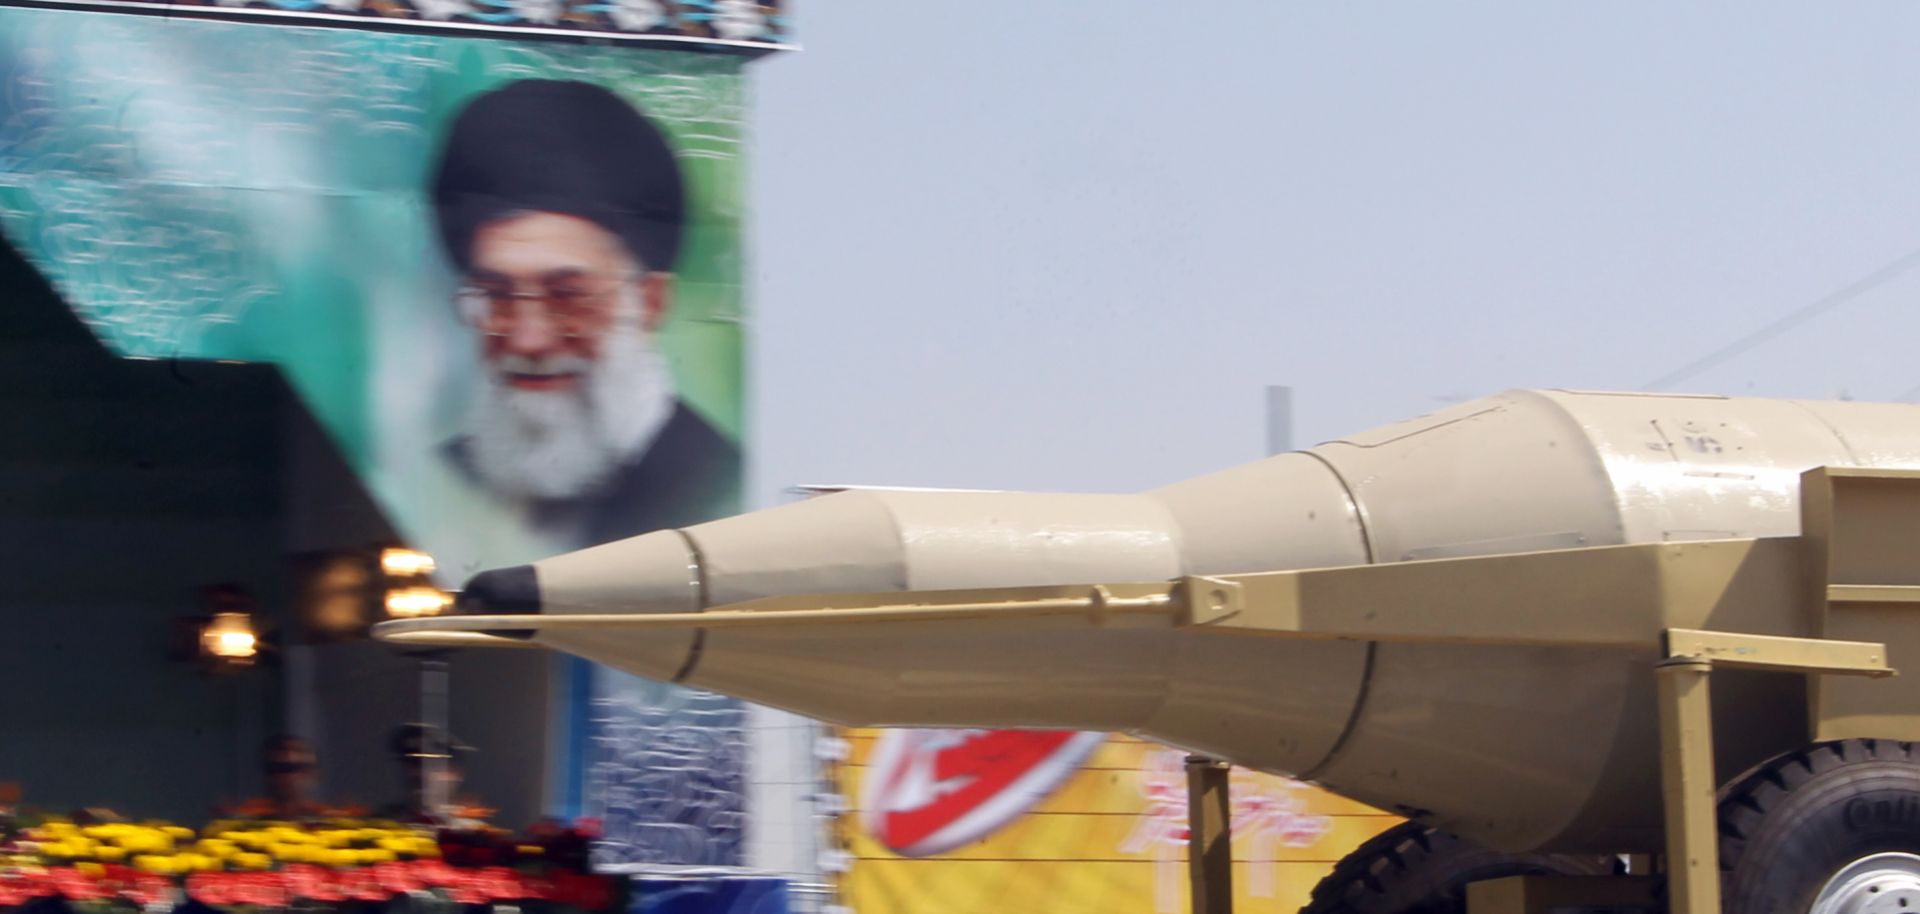 An Iranian military truck carries a Sejjil missile past a portrait of Supreme Leader Ayatollah Ali Khamenei during a Sept. 22, 2013, military parade in Tehran marking the anniversary of the start of the 1980-88 Iran-Iraq war.